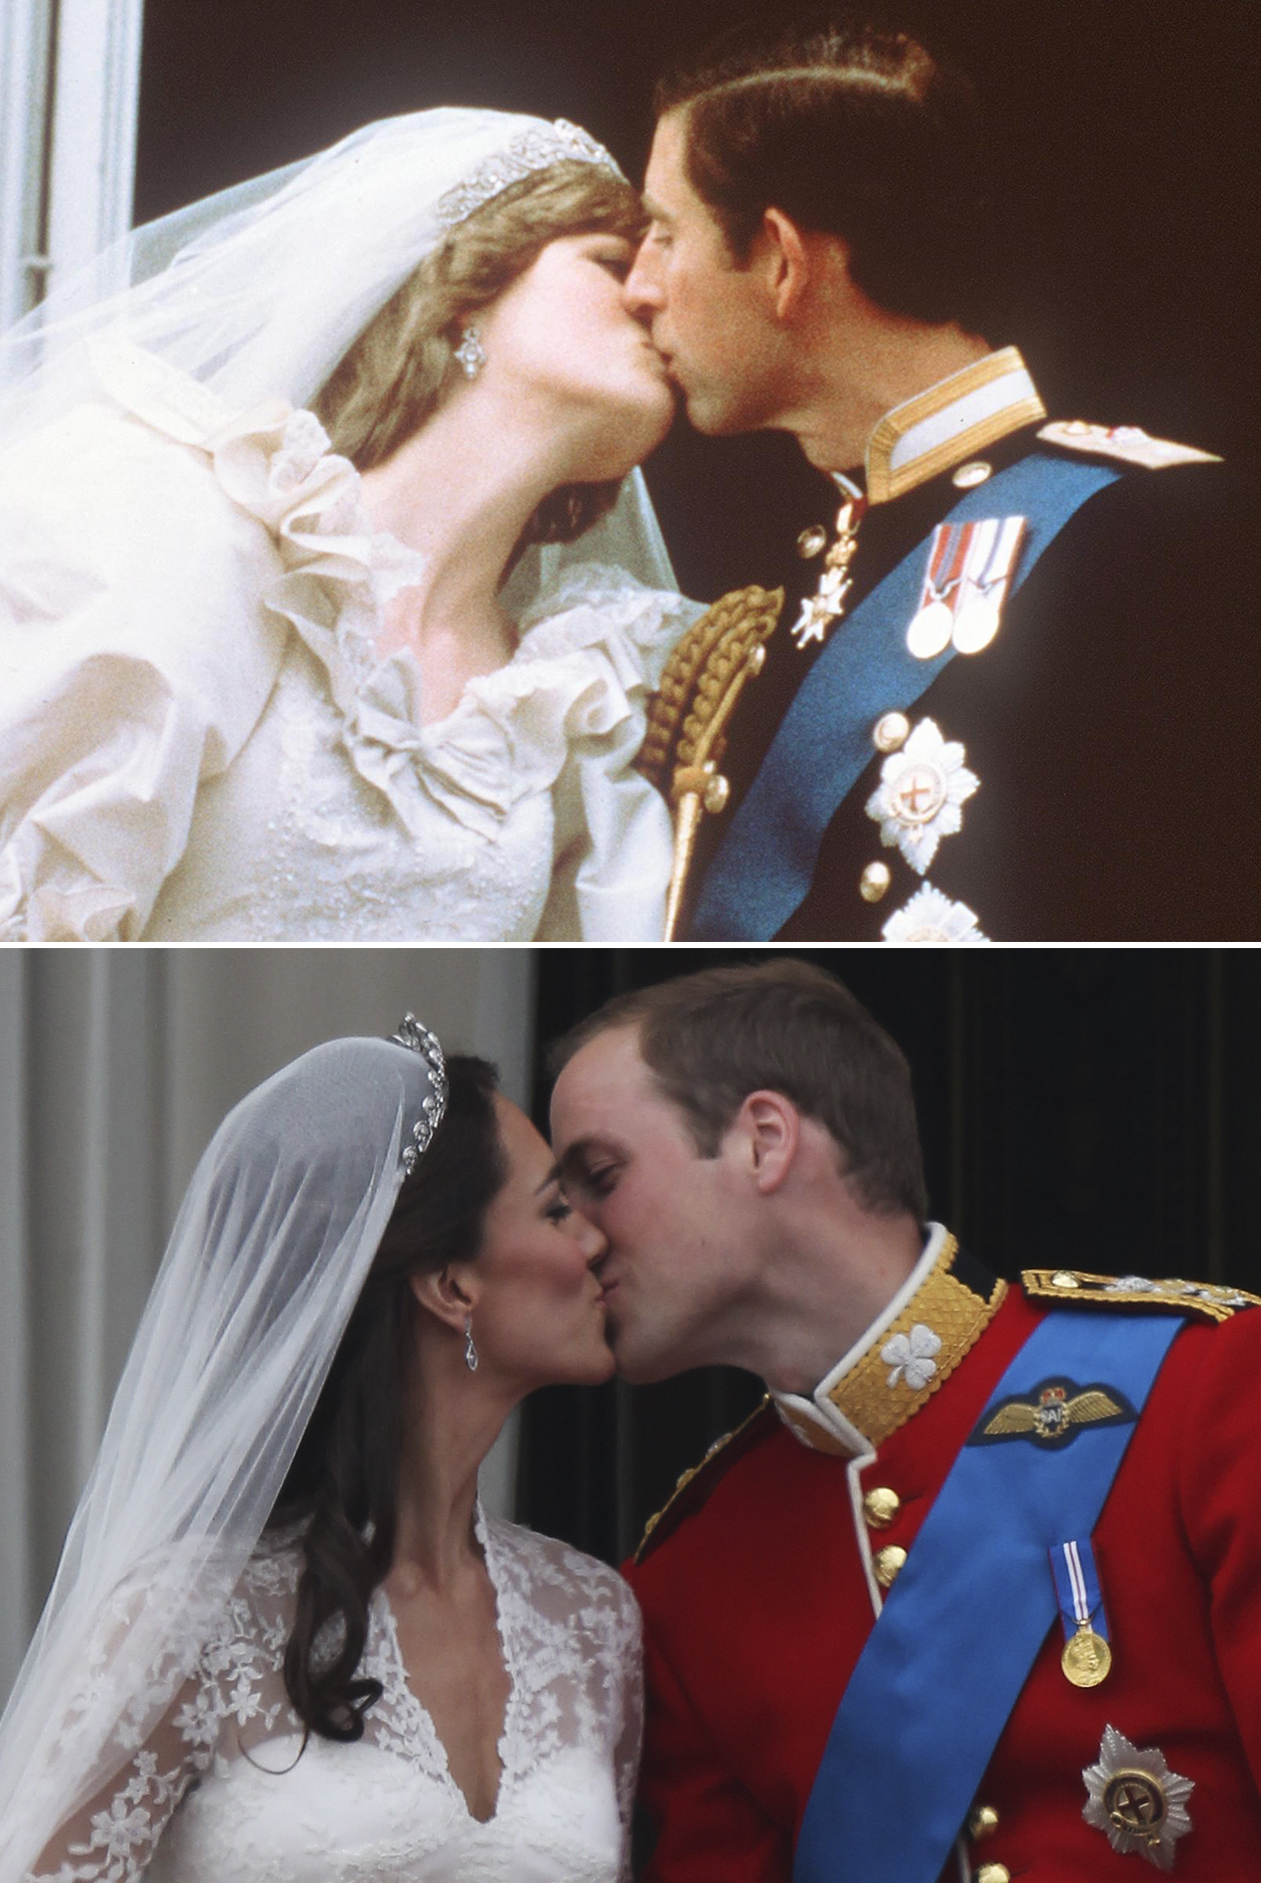 Top: Prince Charles and Princess Diana kiss on the balcony of Buckingham Palace in London, July 19, 1981. Bottom: Prince William, Duke of Cambridge, and Catherine, Duchess of Cambridge, kiss on the balcony of Buckingham Palace, April 29, 2011.